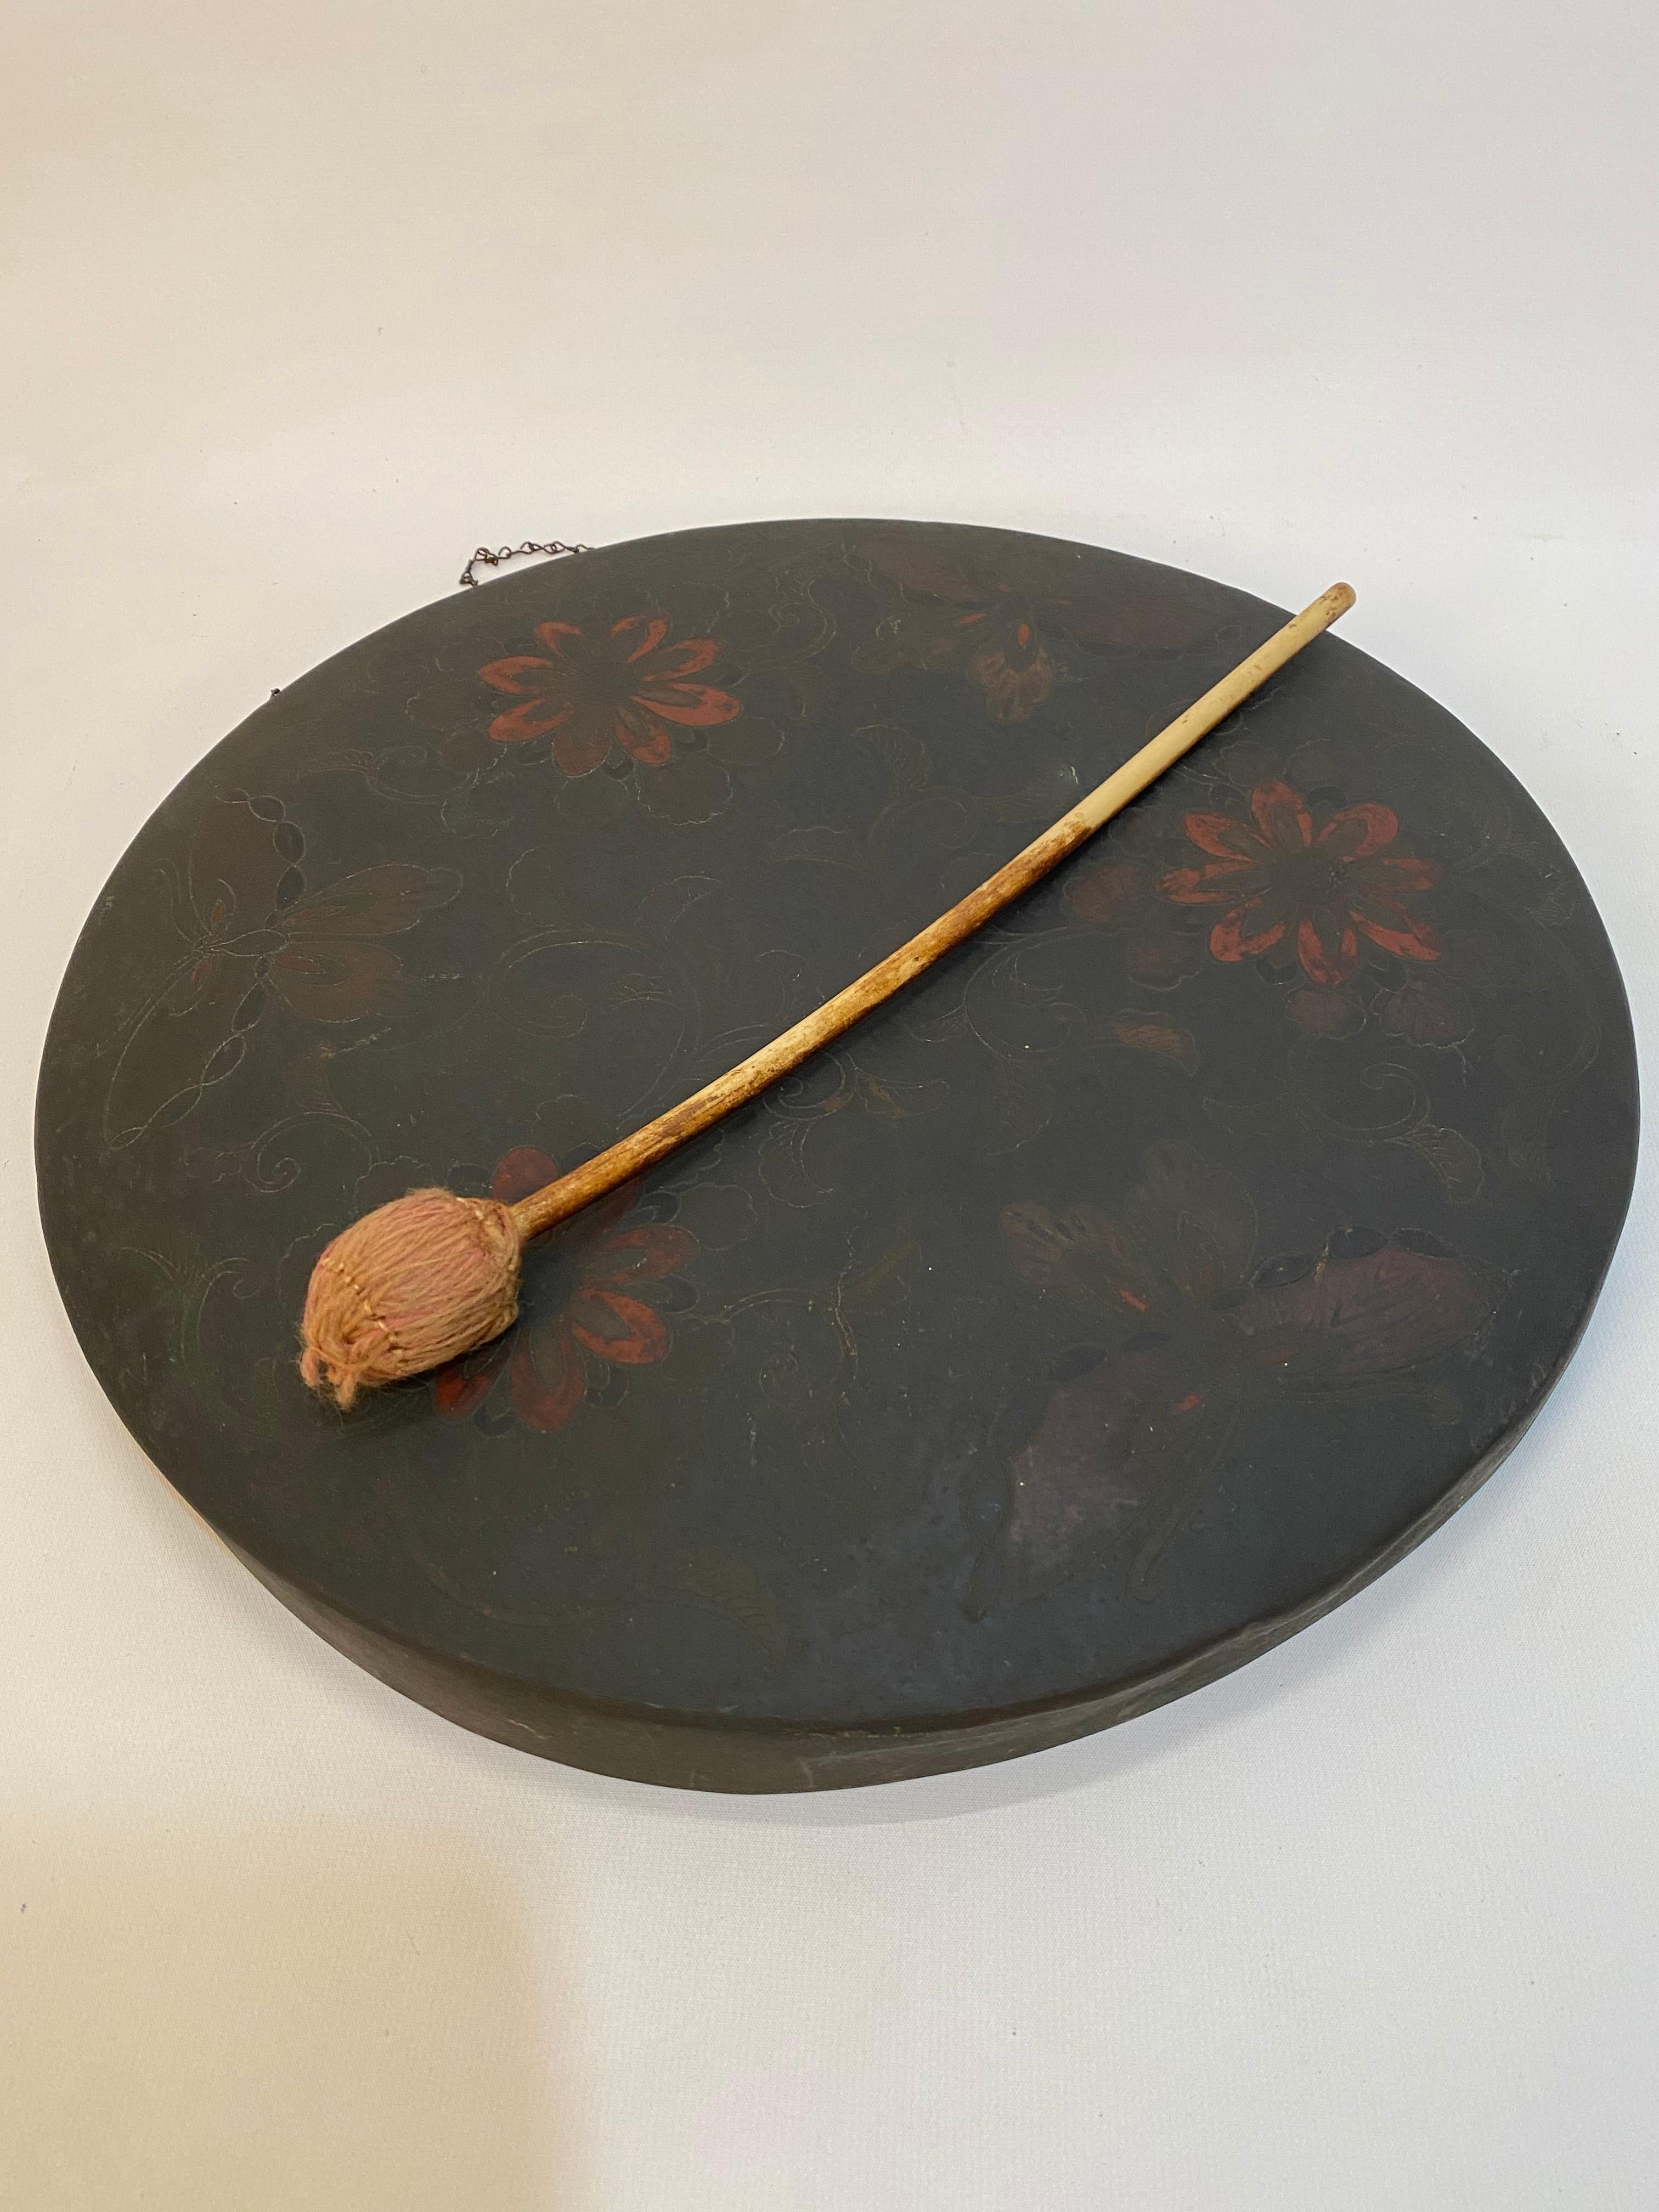 Finely engraved and colored Japanese 'gong with gong mallet. The engravings are of flowers and organic patterns, but the real stopper are the engraved butterflies around the outer border, circa 1870-1890. The piece was purchased in Pre-WWII London